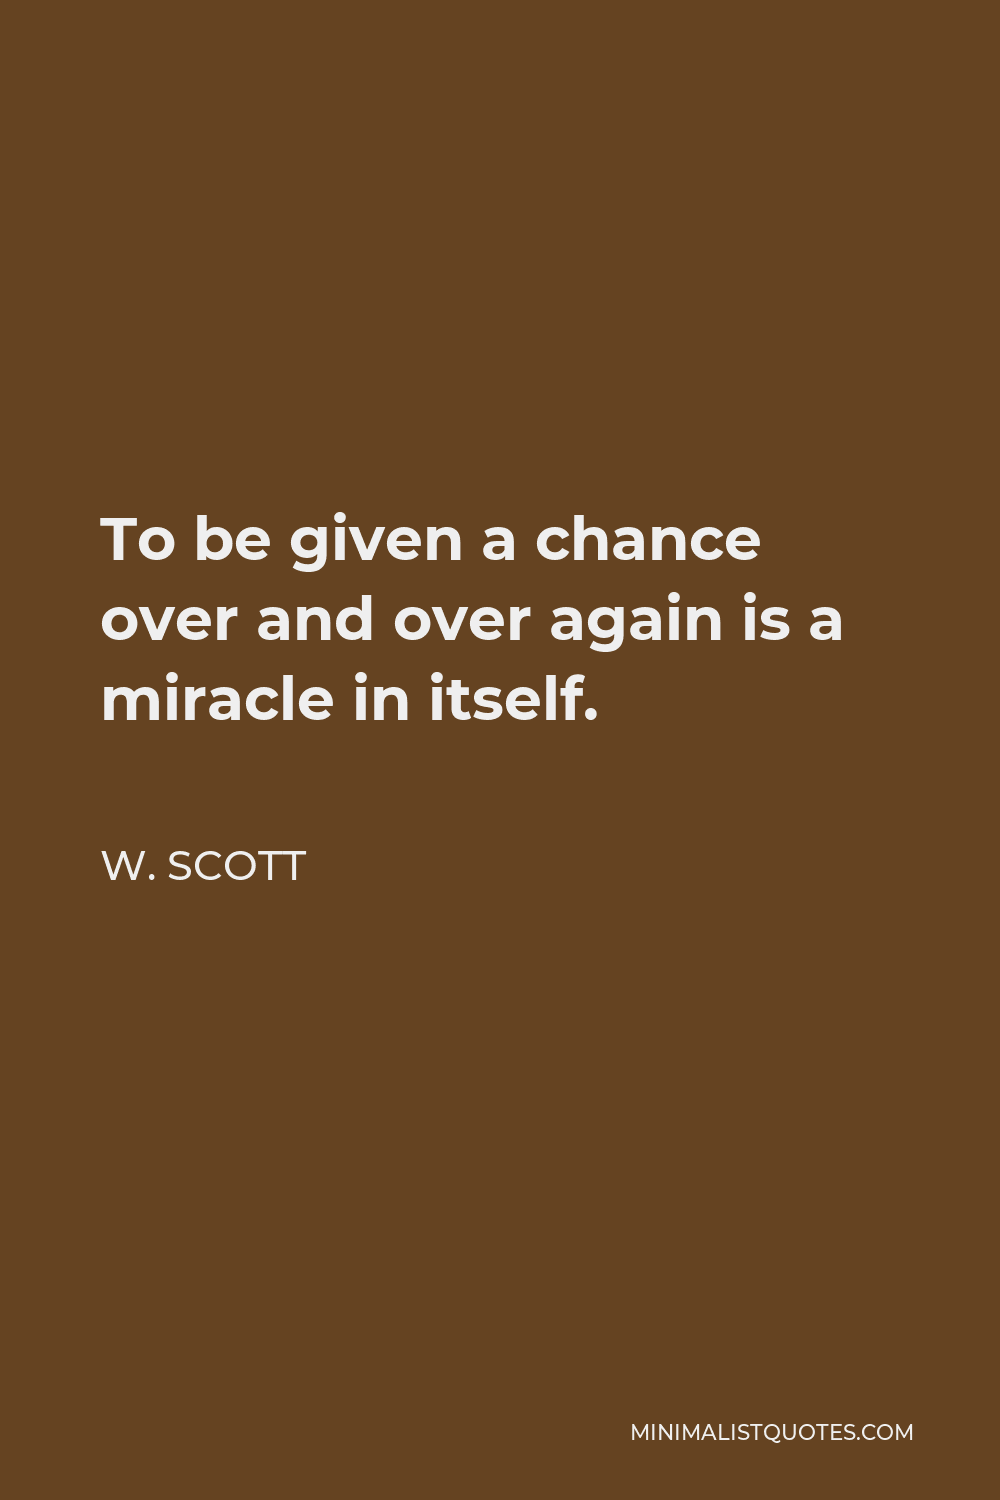 W. Scott Quote - To be given a chance over and over again is a miracle in itself.